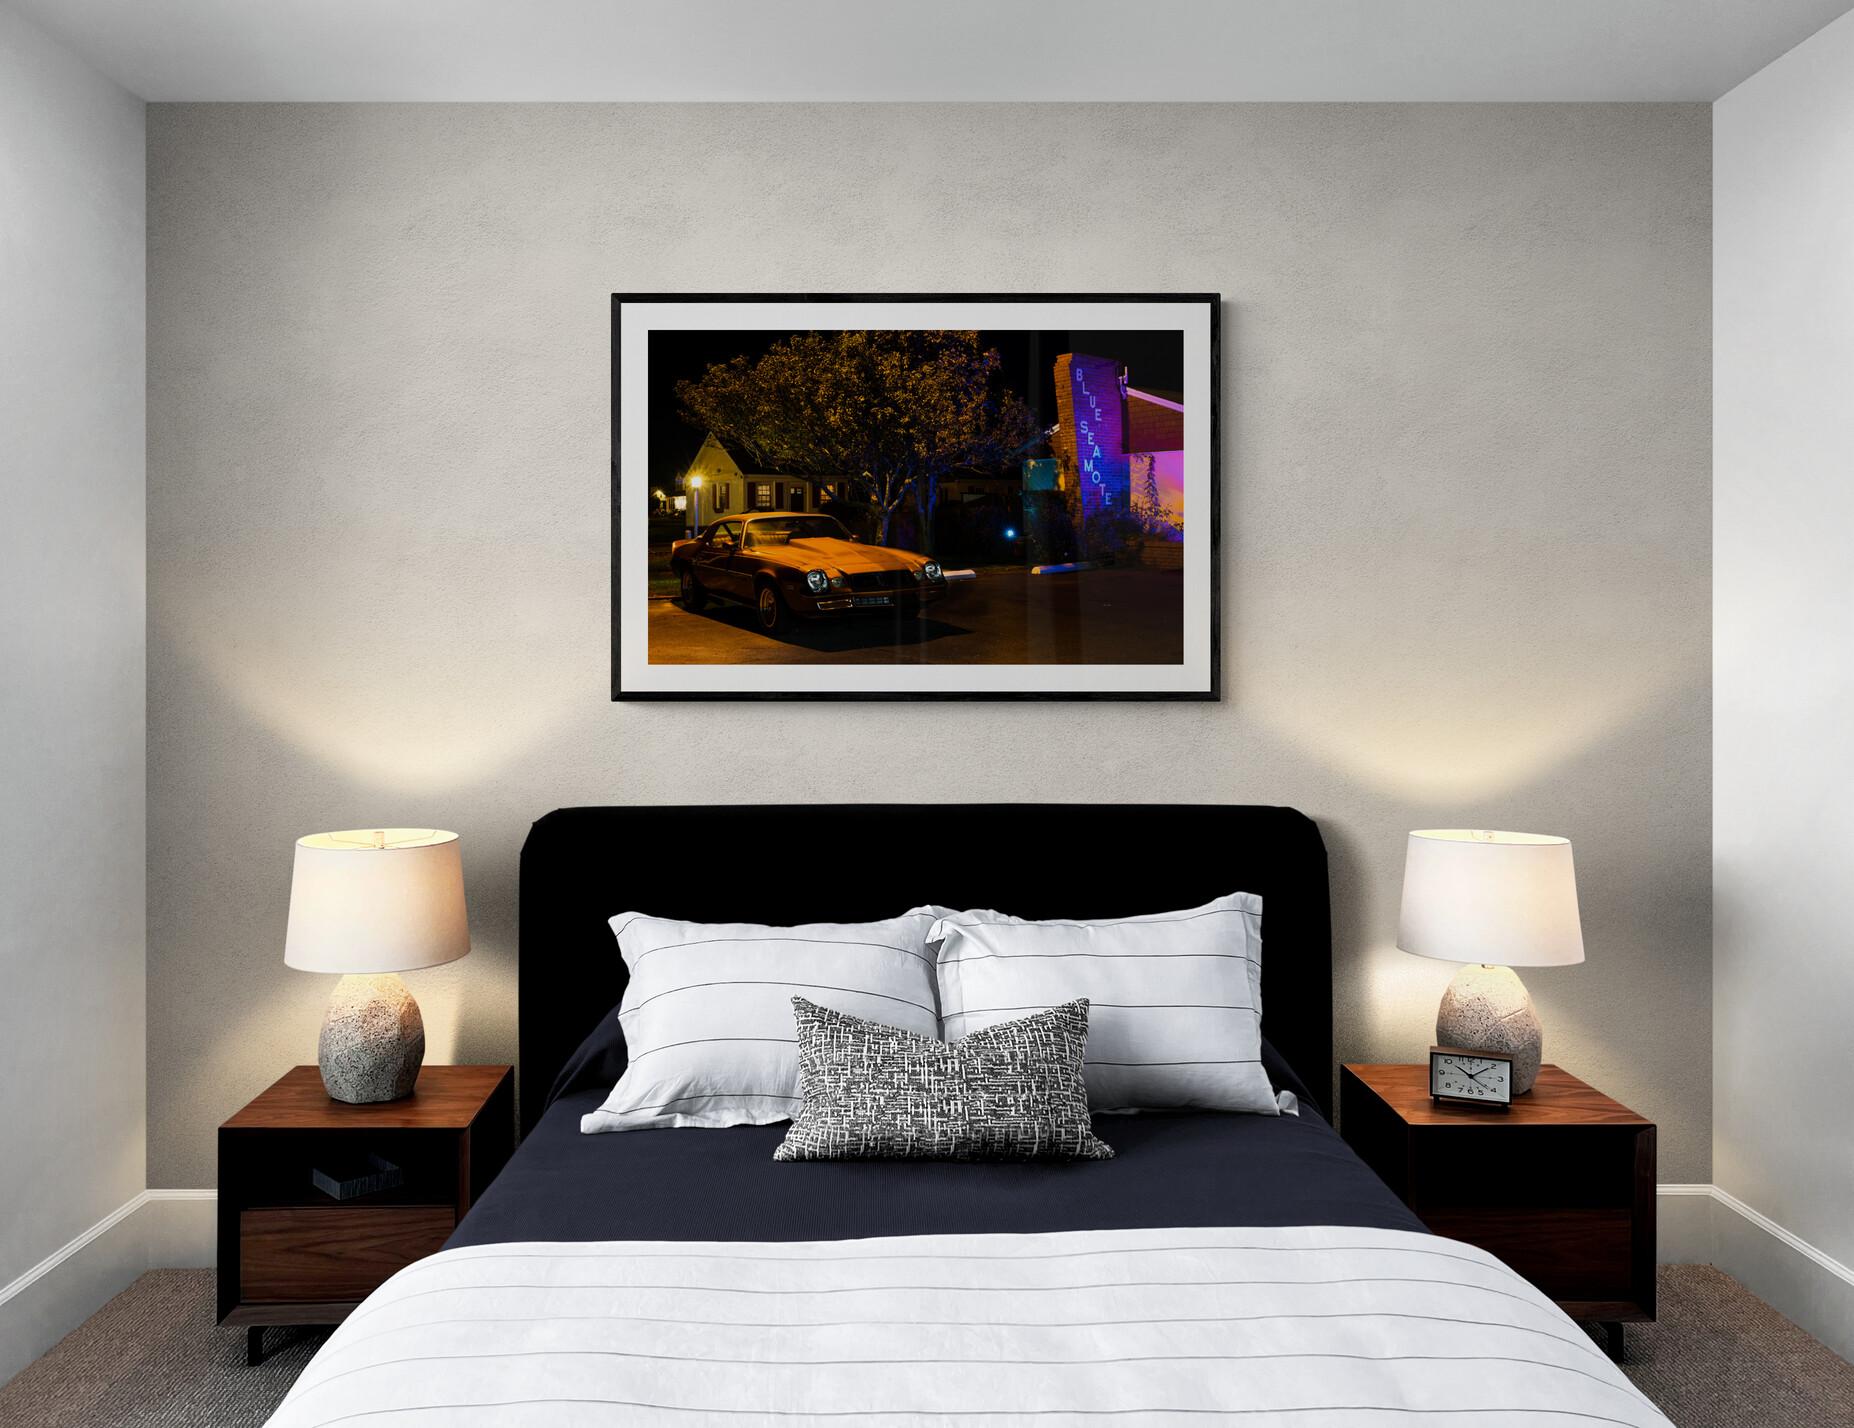  Limited Edition Color Photograph - Car, Camaro, Hotel, Night 20 x 24 - Black Landscape Photograph by Howard Lewis